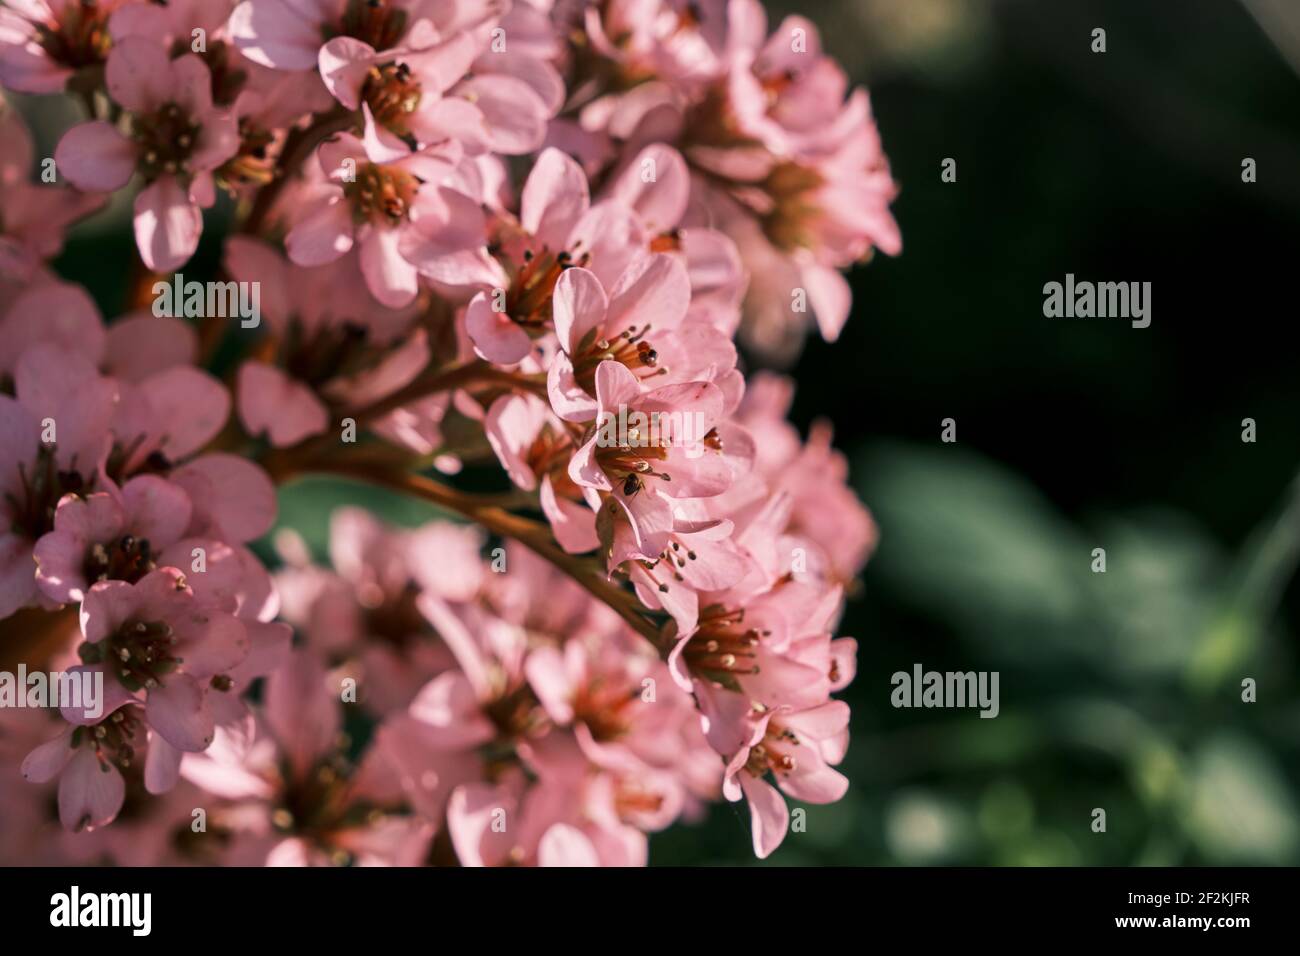 Heart-leaved bergenia ornamental plant pink flowers close up Stock Photo